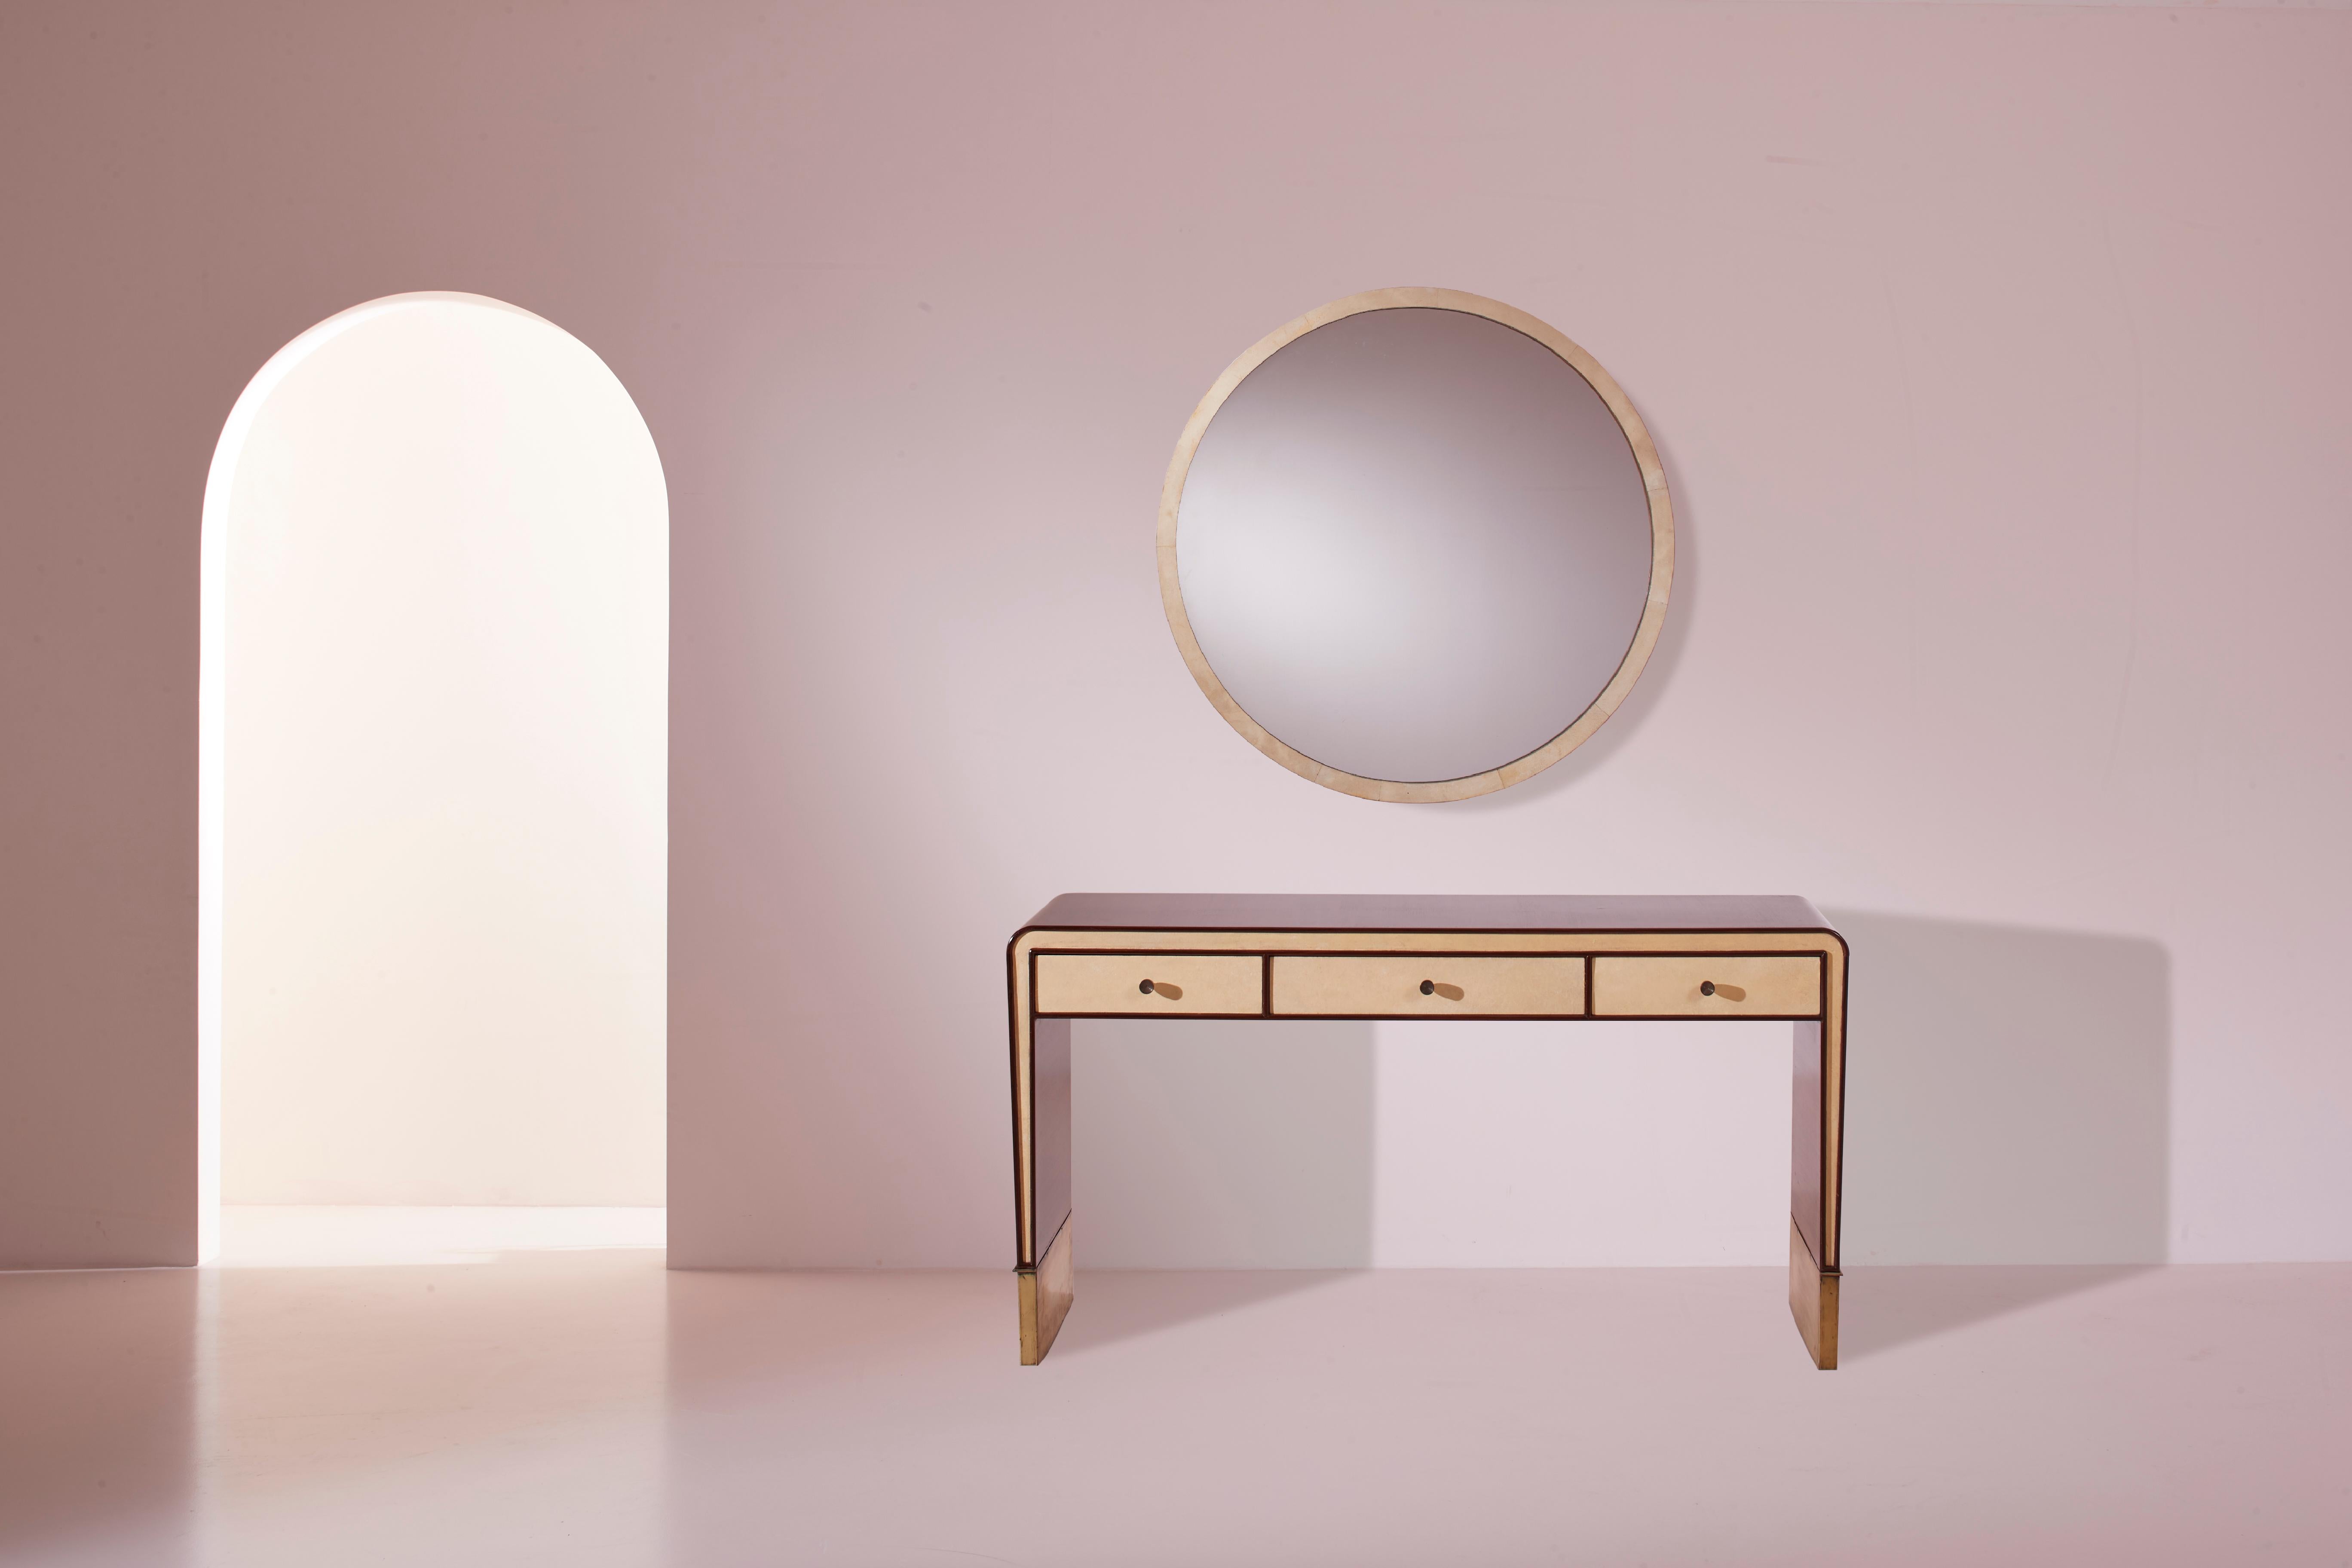 Mirror in American walnut and parchment, Gio Ponti design, 1930s, Italian production. A perfect geometric circle in walnut finished in parchment with a natural and evocative flavor. 

This mirror designed by Gio Ponti stands out for the combination